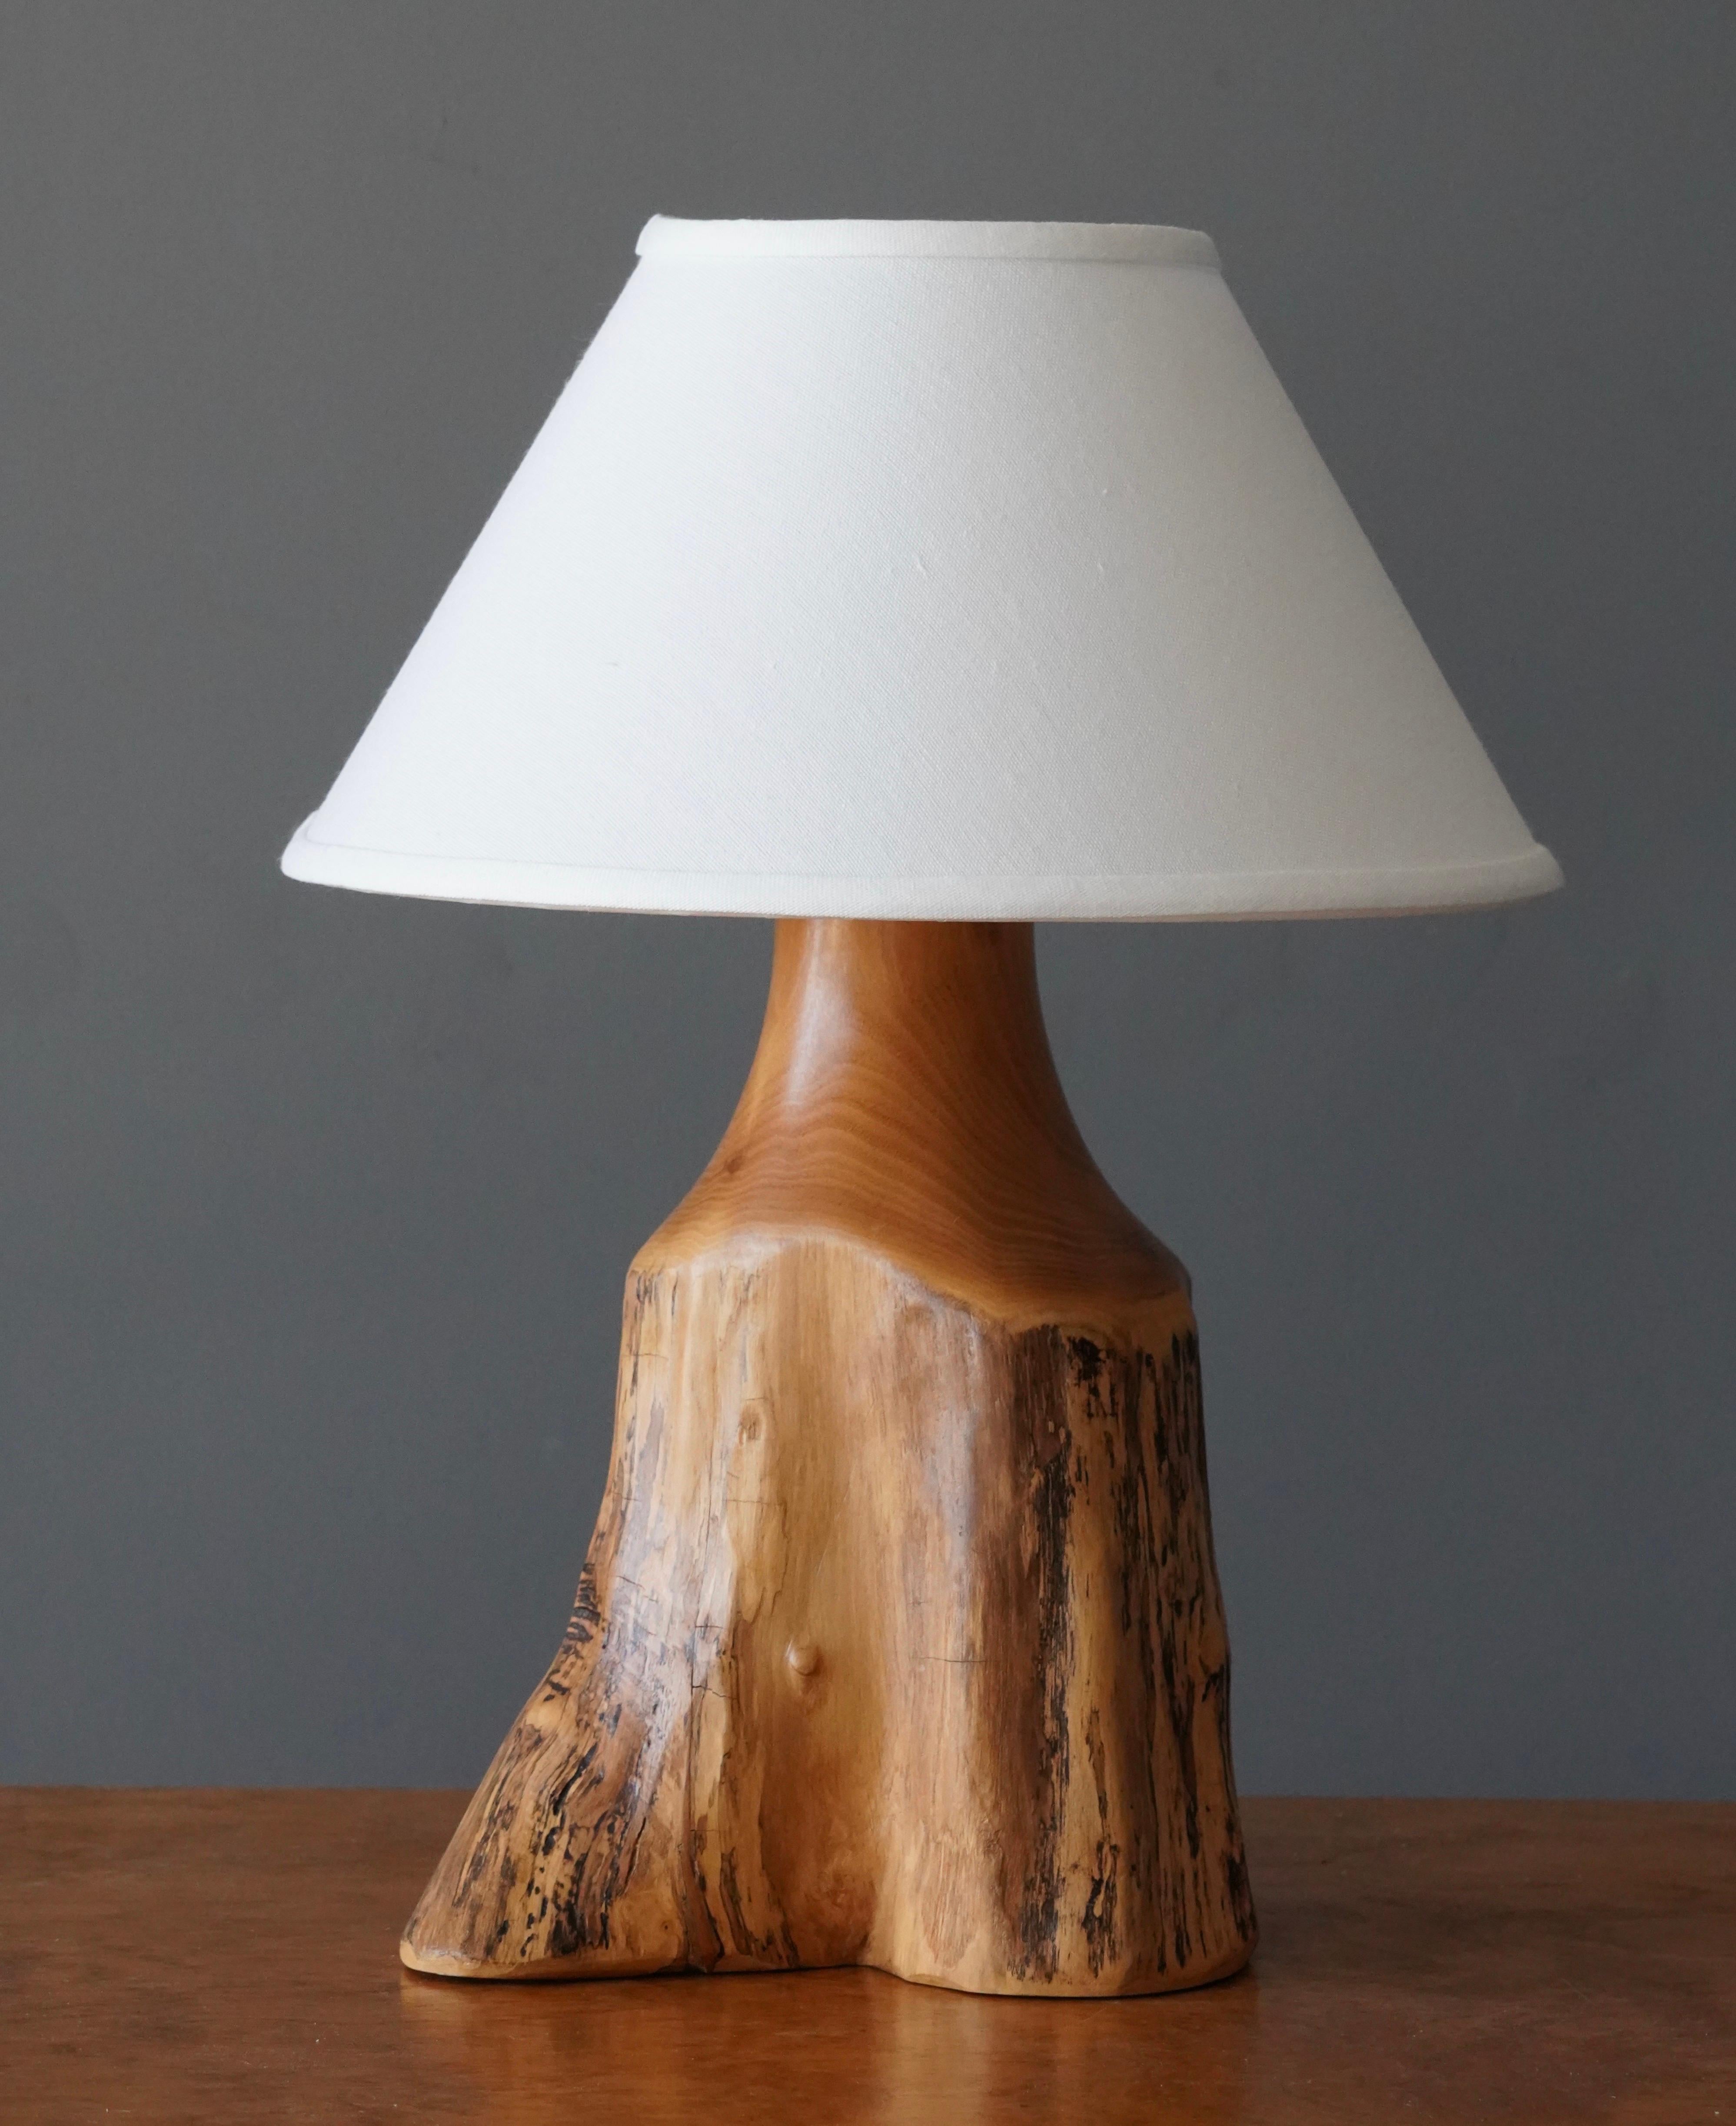 A table lamp. Designed and produced by Sigvard Nilsson for his own studio, Söwe Konst, Sweden, c. 1970s. Signed.

In solid cottonwood.

Dimensions listed are without shade. 
Dimensions with shade: Height is 16.5 inches, Width is 12.25